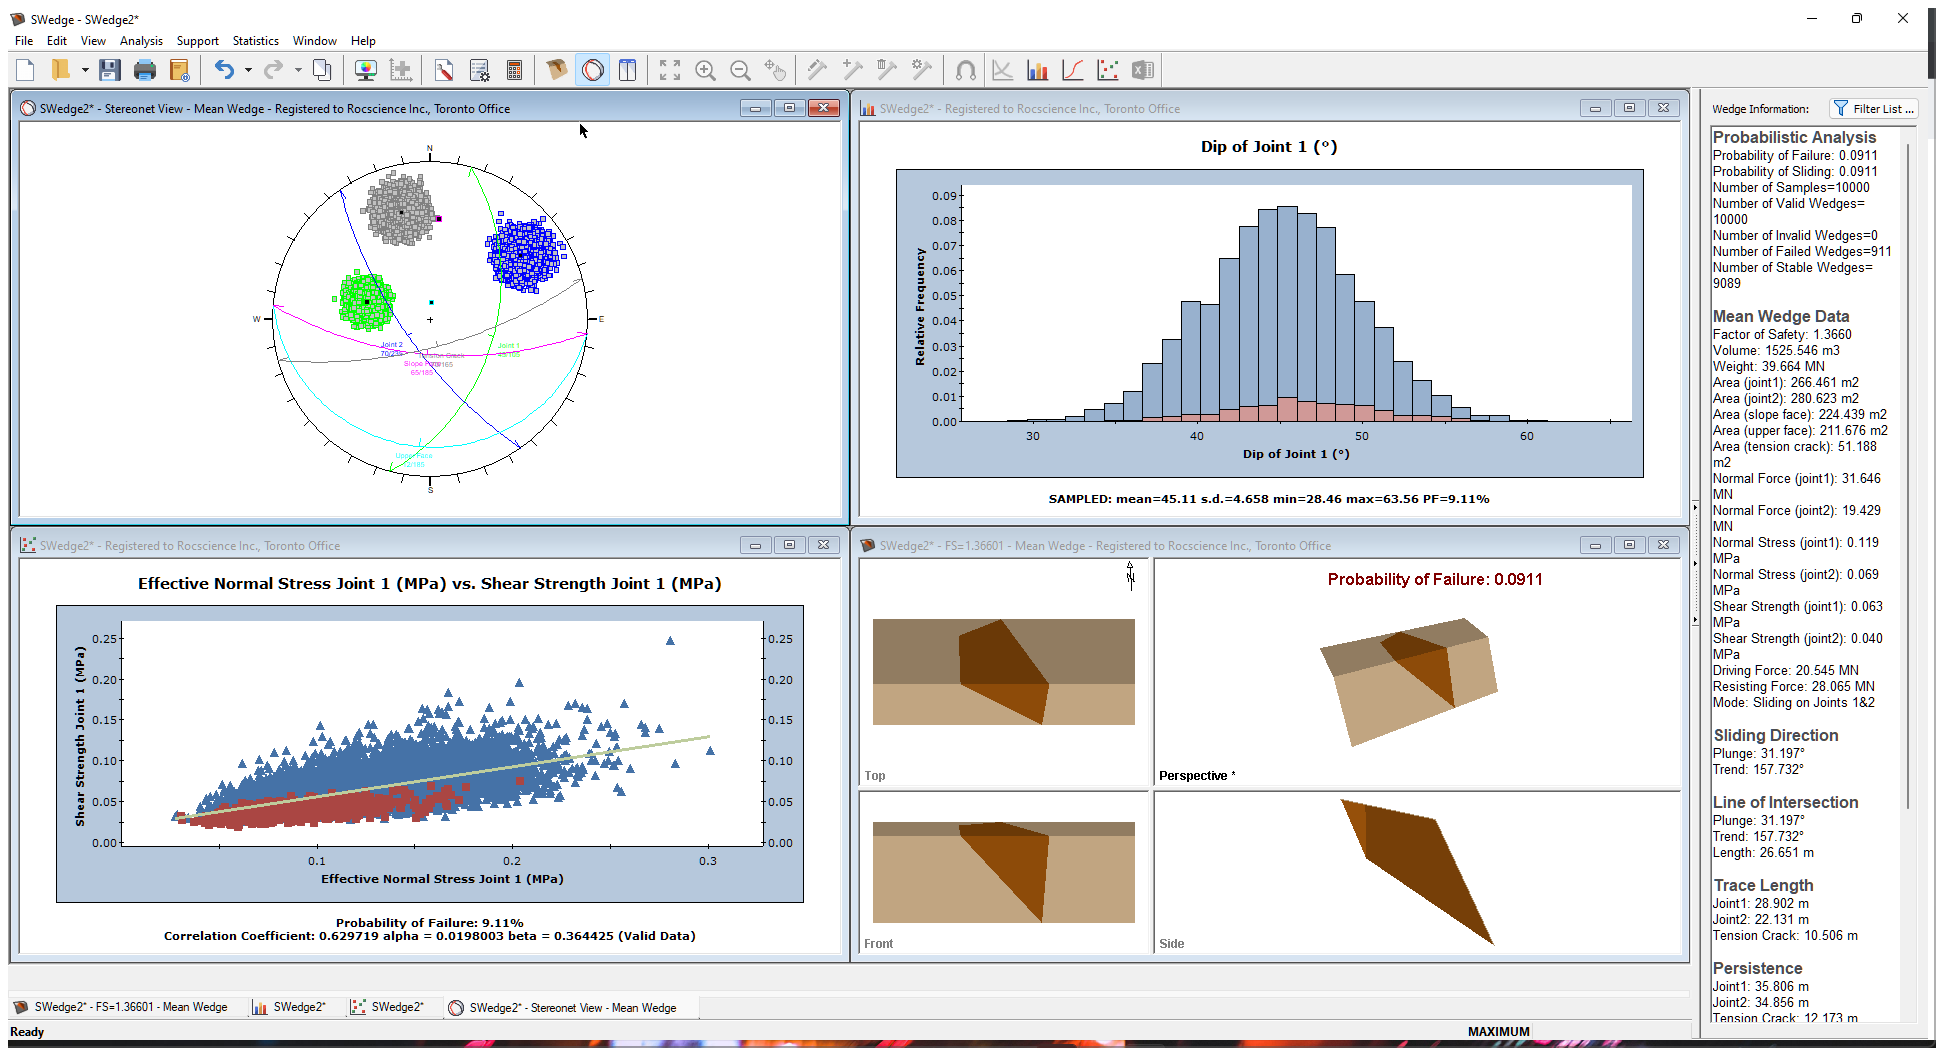 SWedge showing tiled Stereonet View, Histogram View, Scatter Plot View, and Wedge View